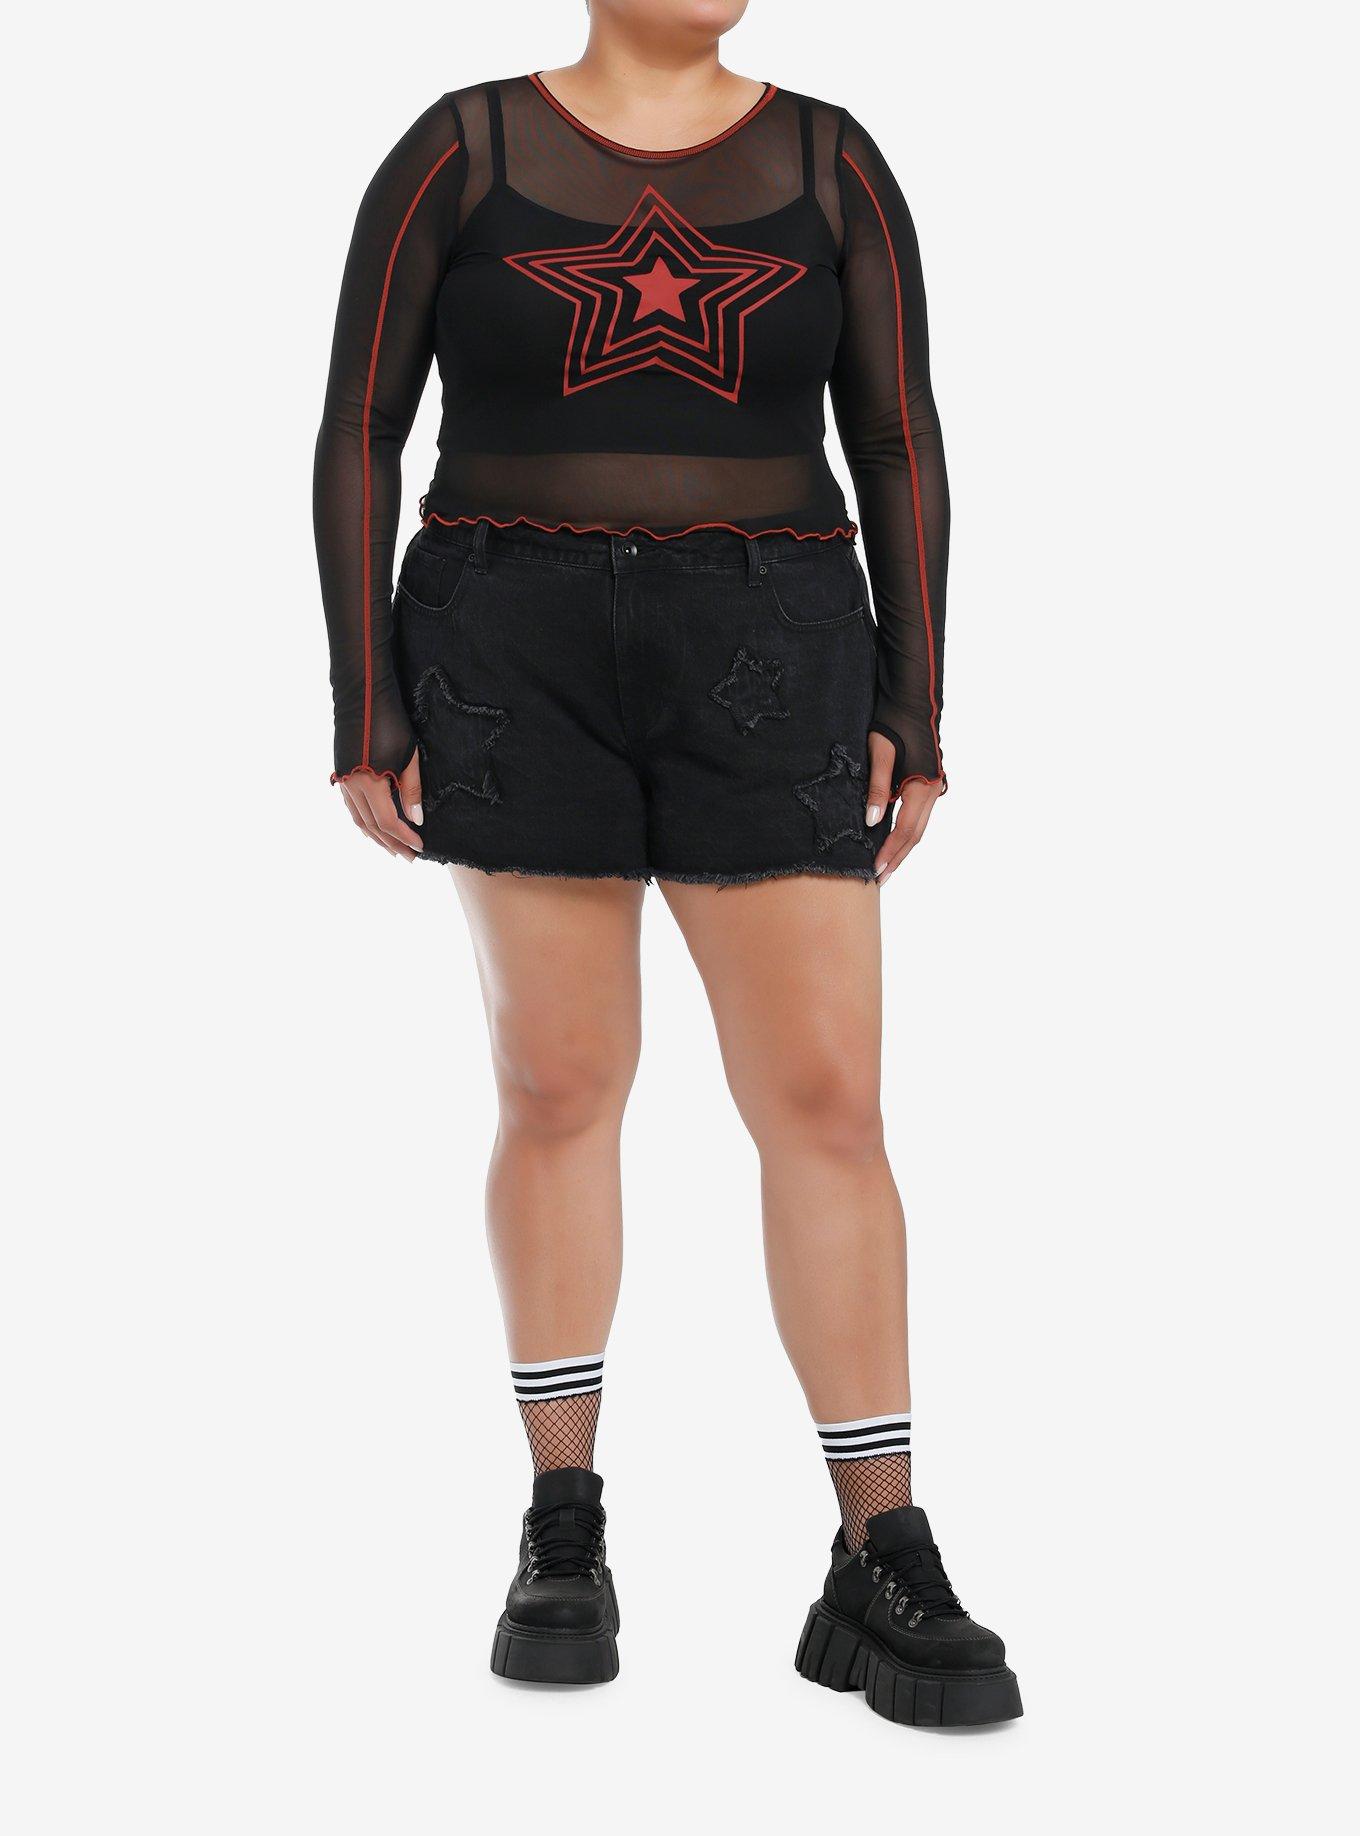 Social Collision Red Star Mesh Girls Crop Long-Sleeve Twofer Plus Size, RED, alternate